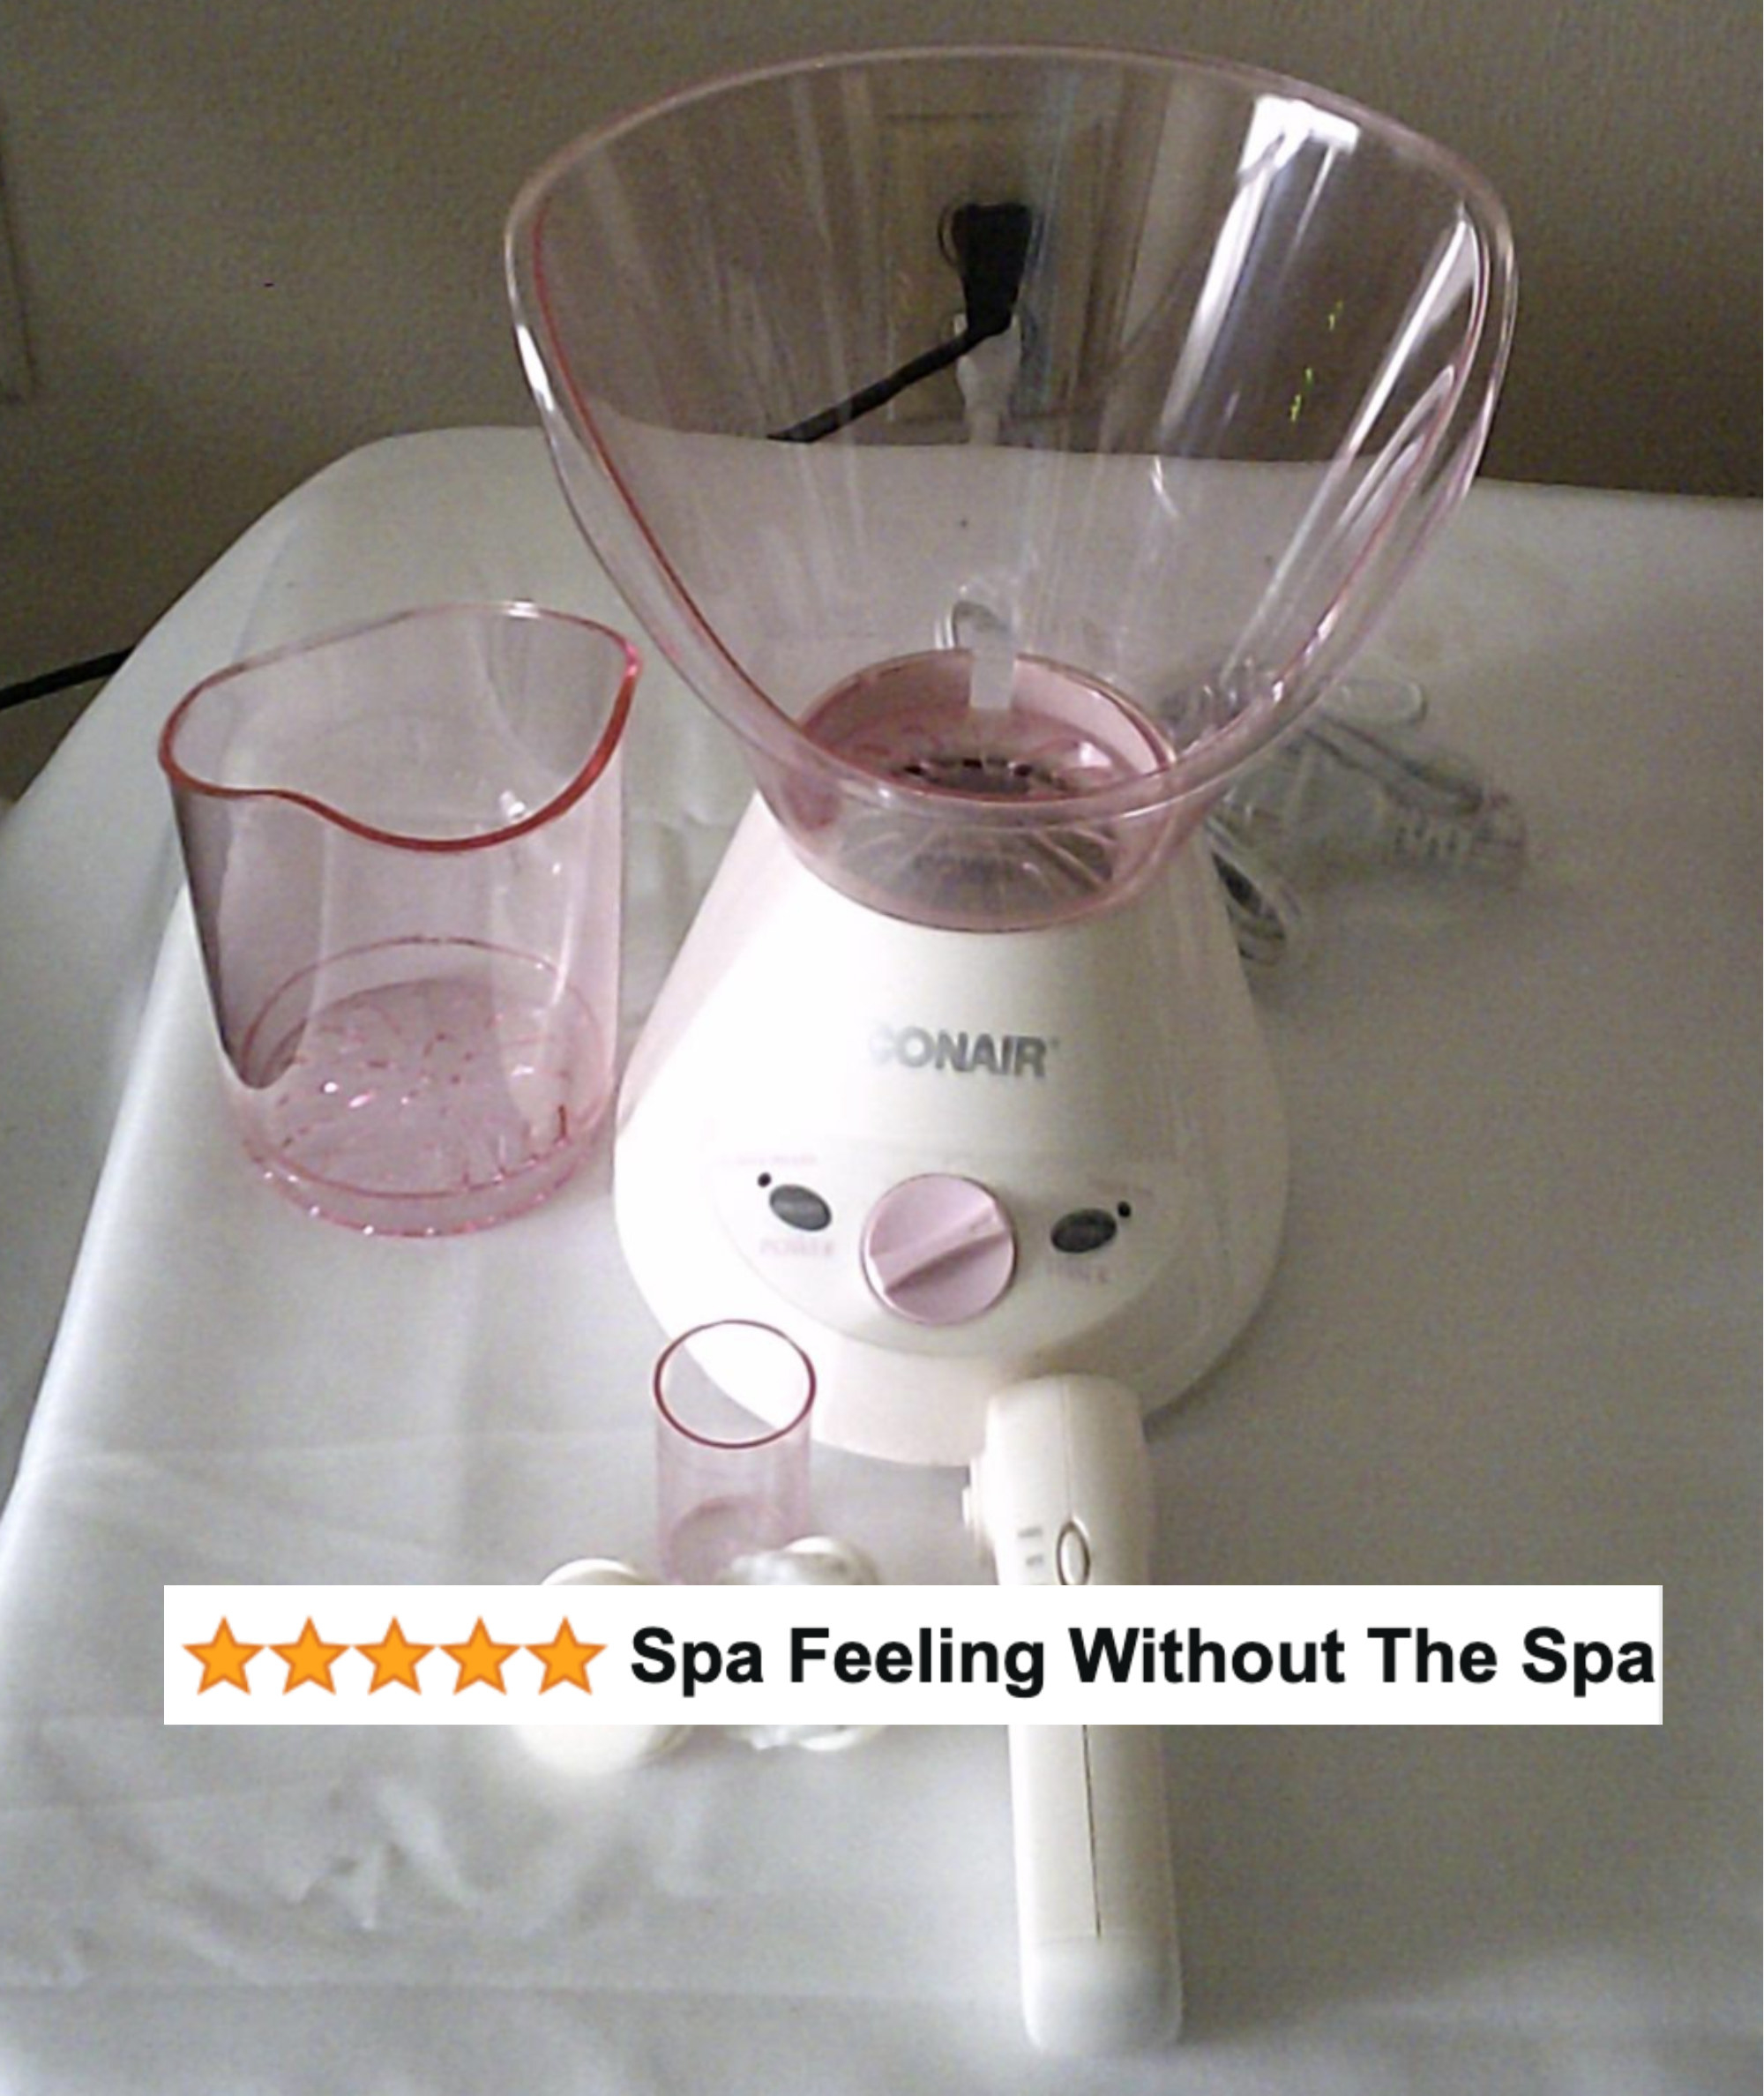 Facial steamer device on a table with a cup and rating stars, text &quot;Spa Feeling Without The Spa&quot; above